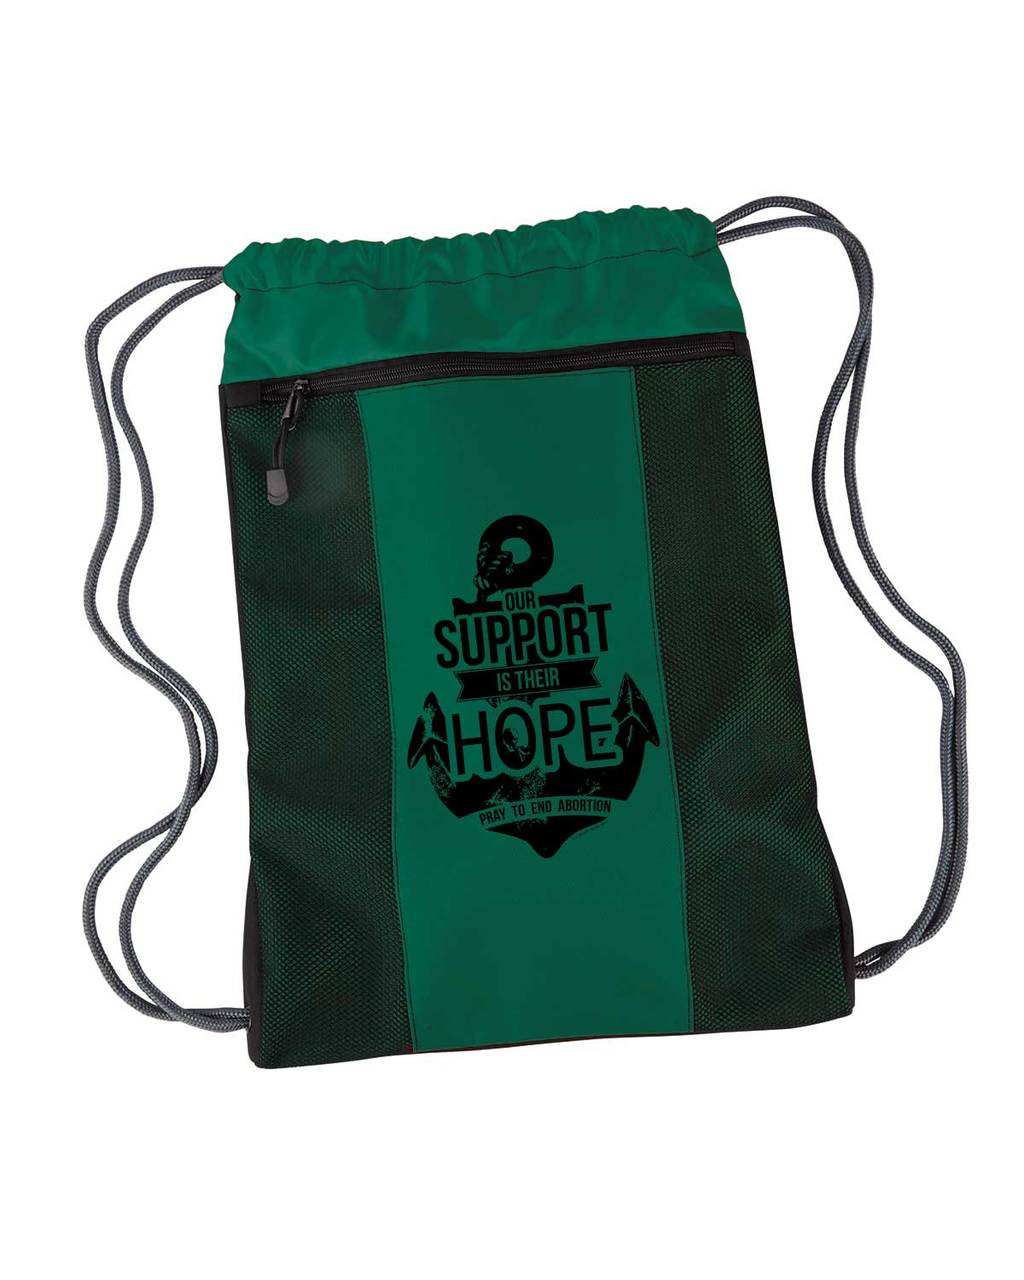 "Our Support is Their Hope" Drawstring Cinch Backpack